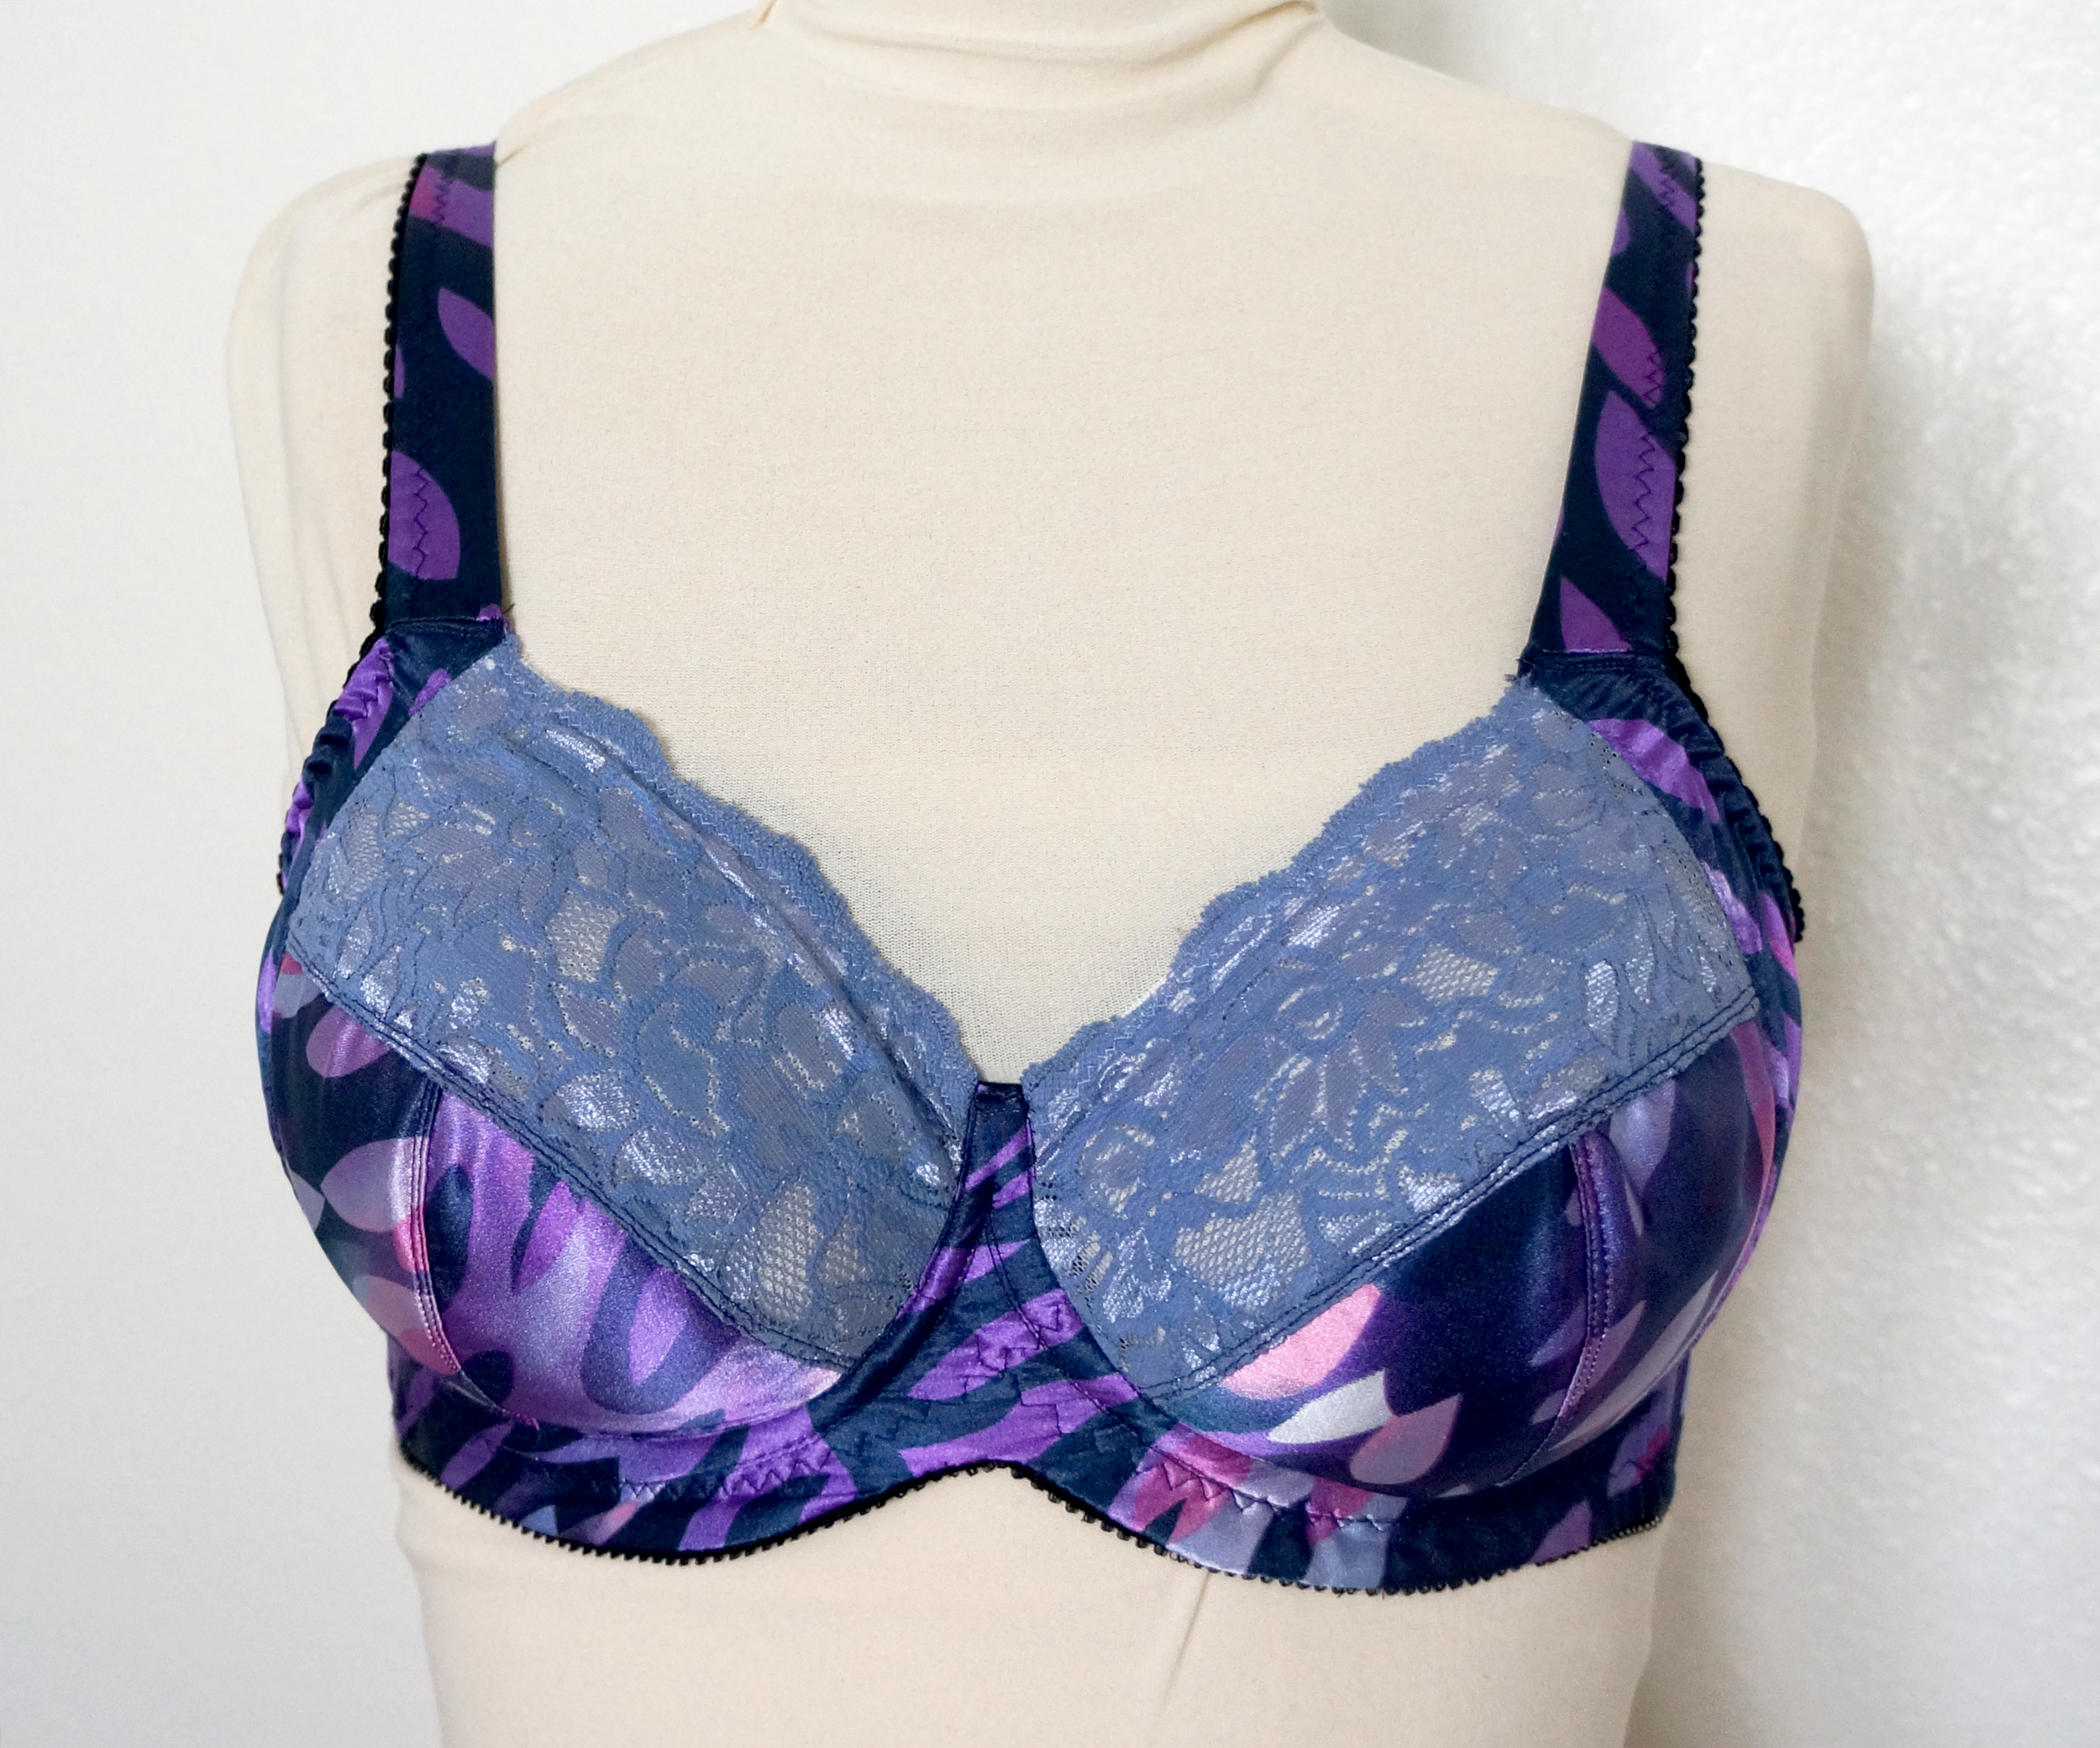 Experiment time: Can I sew a bra into my bathing suit?